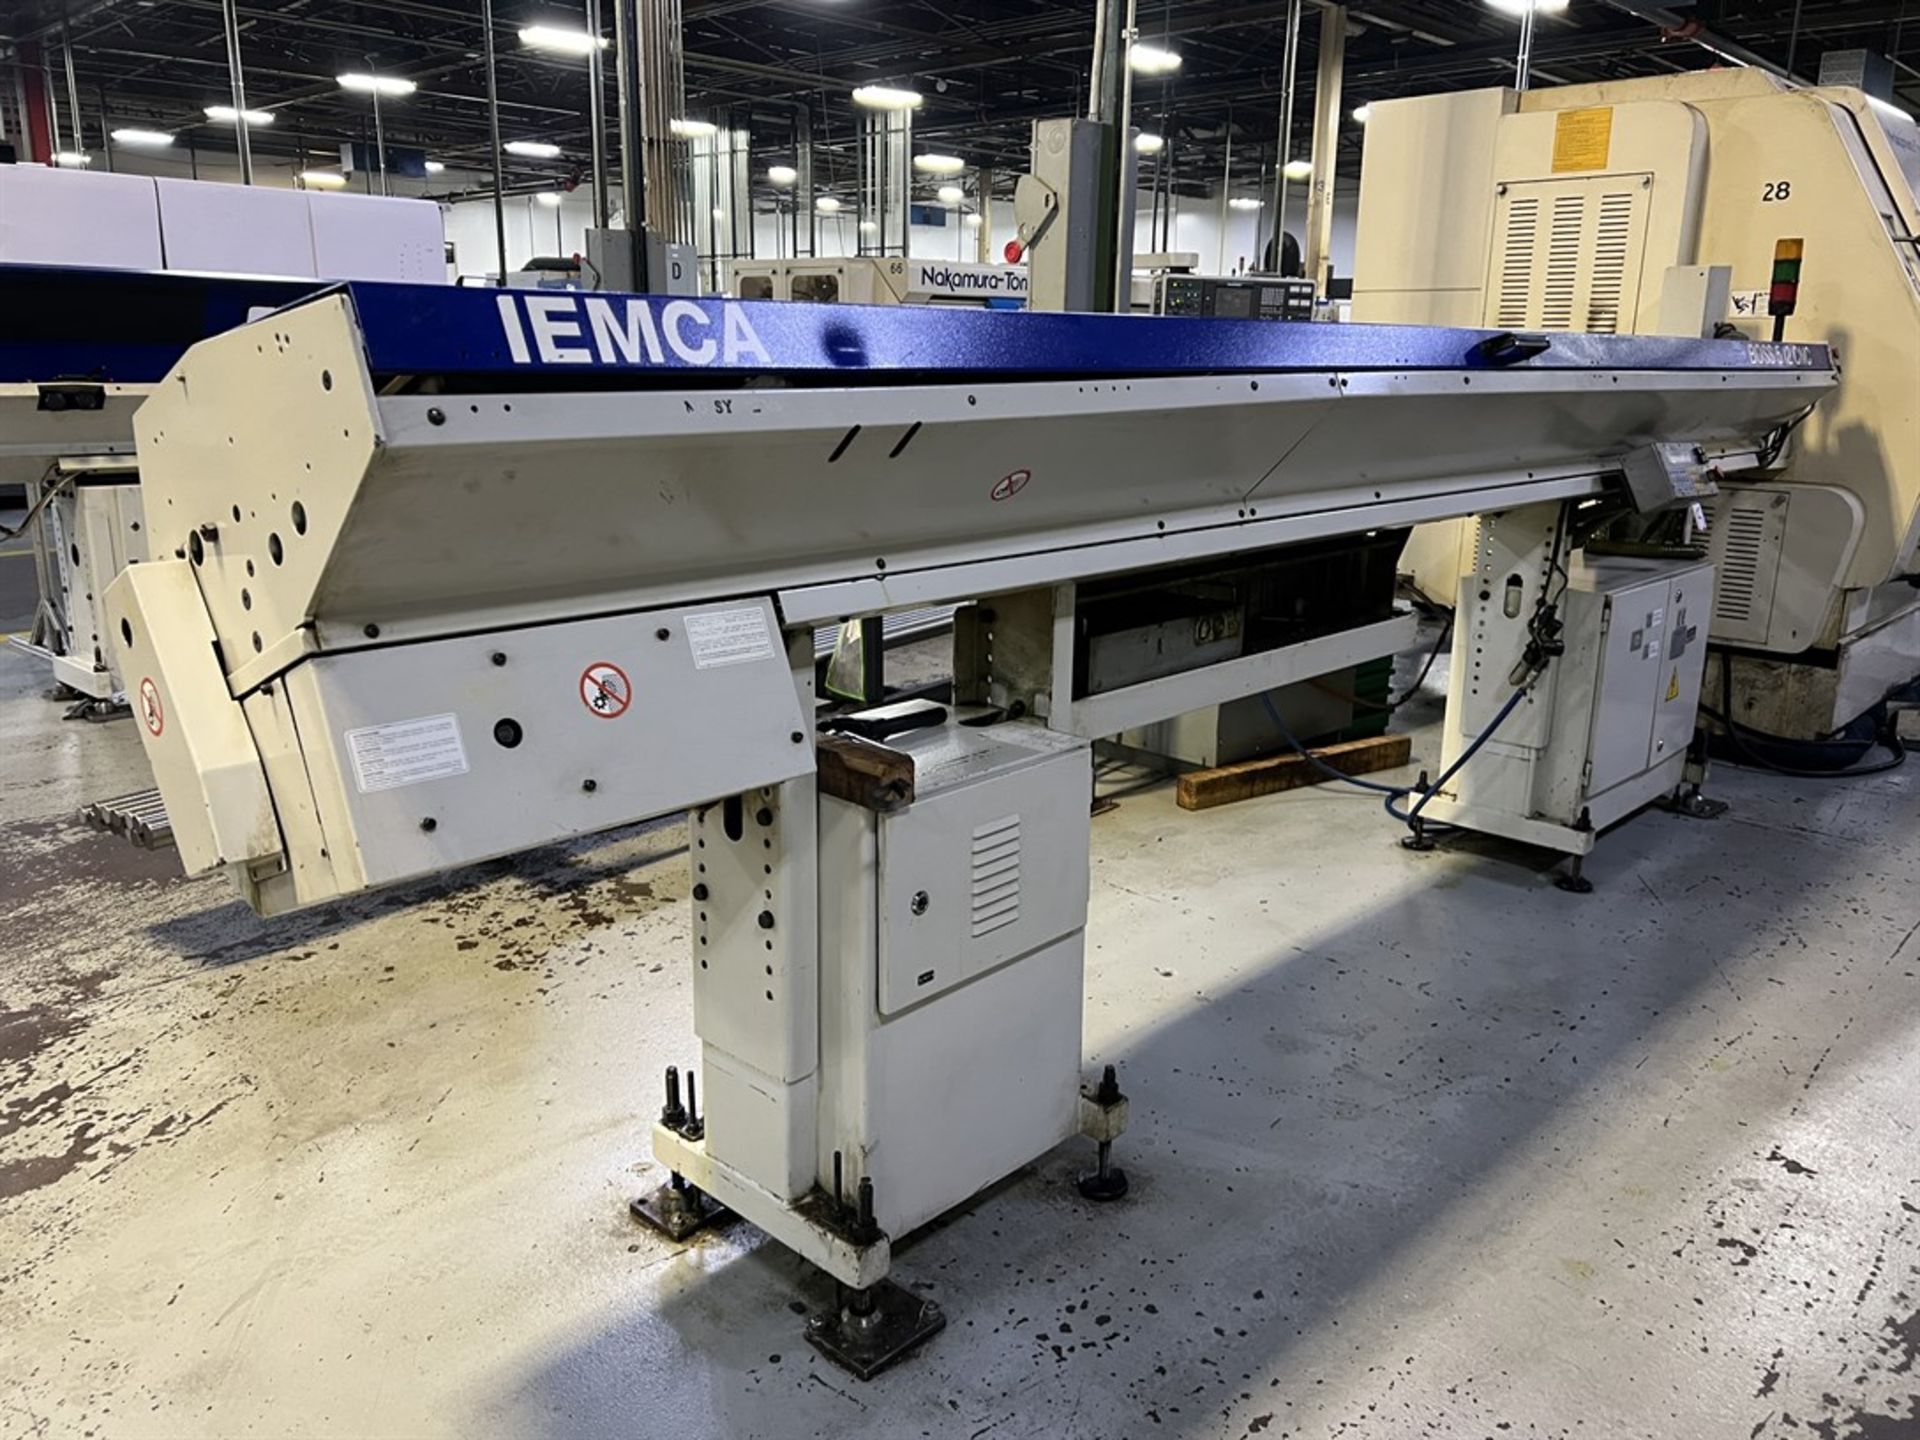 IEMCA Boss 542 CNC/ 37 Bar Feed s/n 98110255, 173" x 1.65" Capacity (A rigging and loading charge of - Image 4 of 6